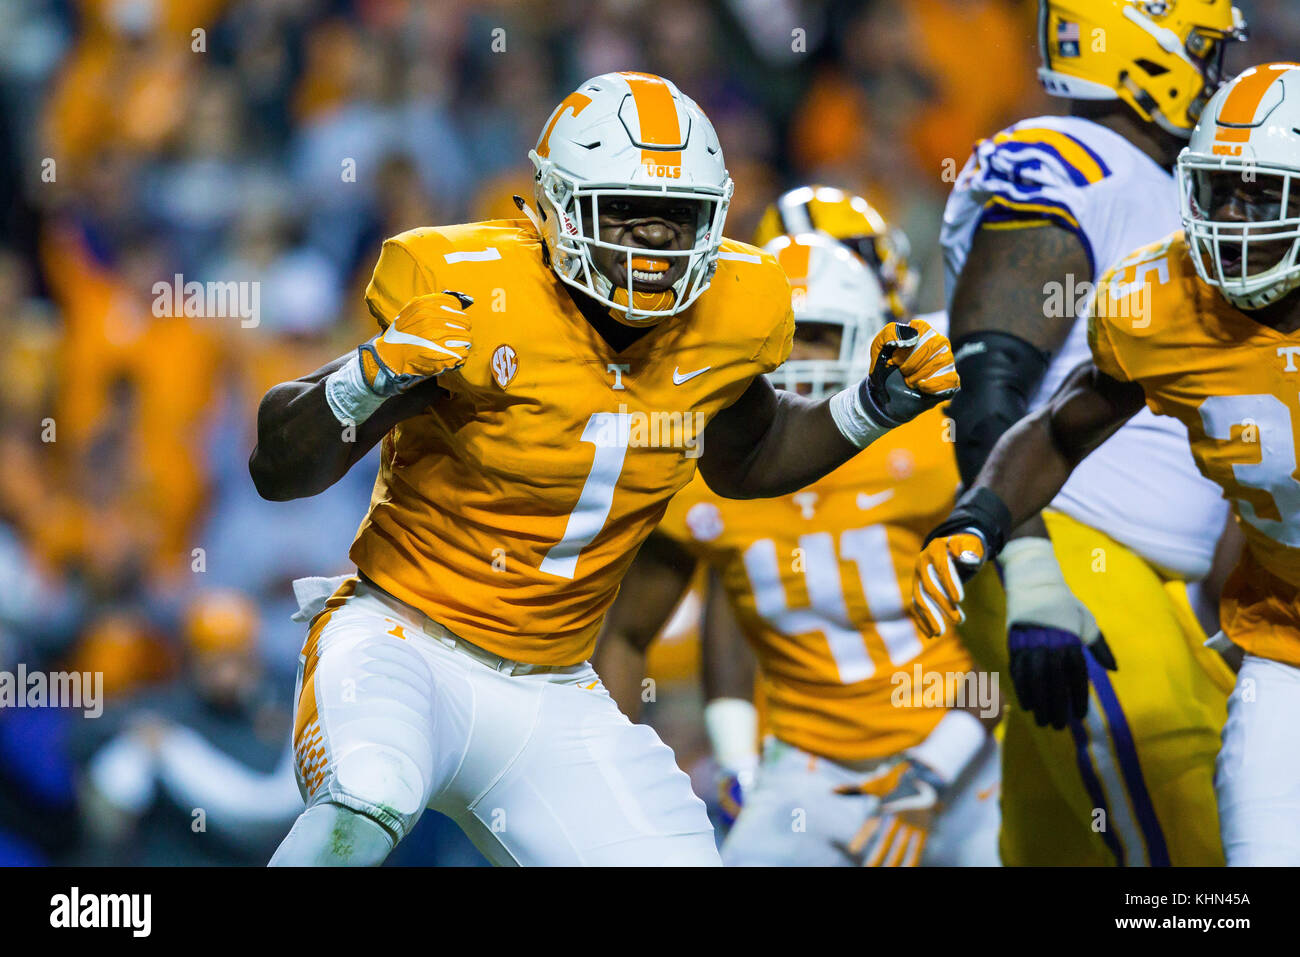 November 18, 2017: Jonathan Kongbo #1 of the Tennessee Volunteers celebrates a tackle during the NCAA football game between the University of Tennessee Volunteers and the Louisiana State University Tigers at Neyland Stadium in Knoxville, TN Tim Gangloff/CSM Stock Photo